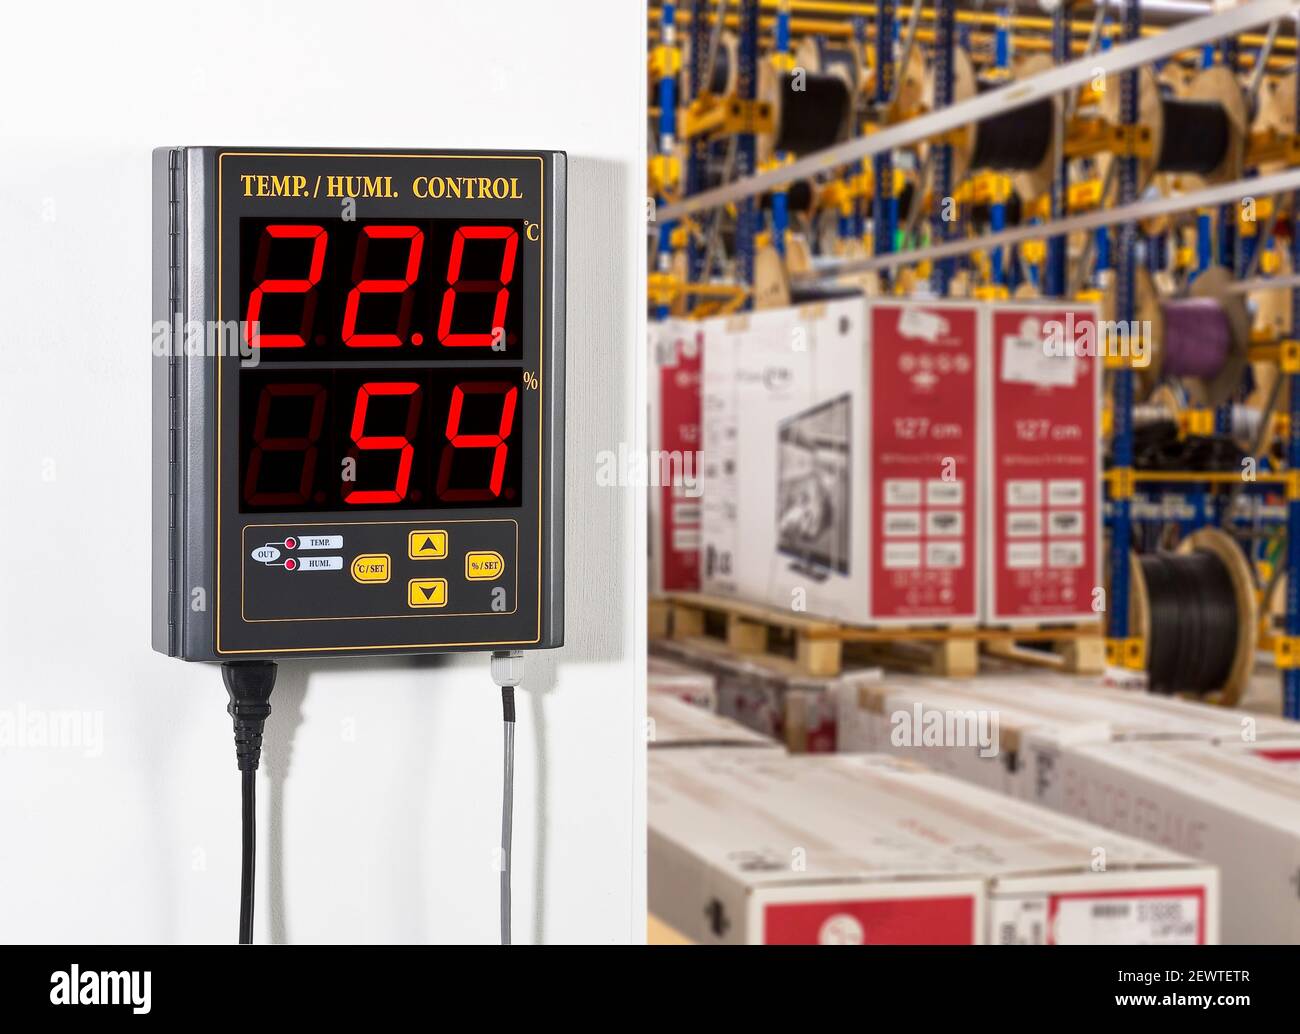 Thermo-Hygrometer wall mounted inside a business plant Stock Photo